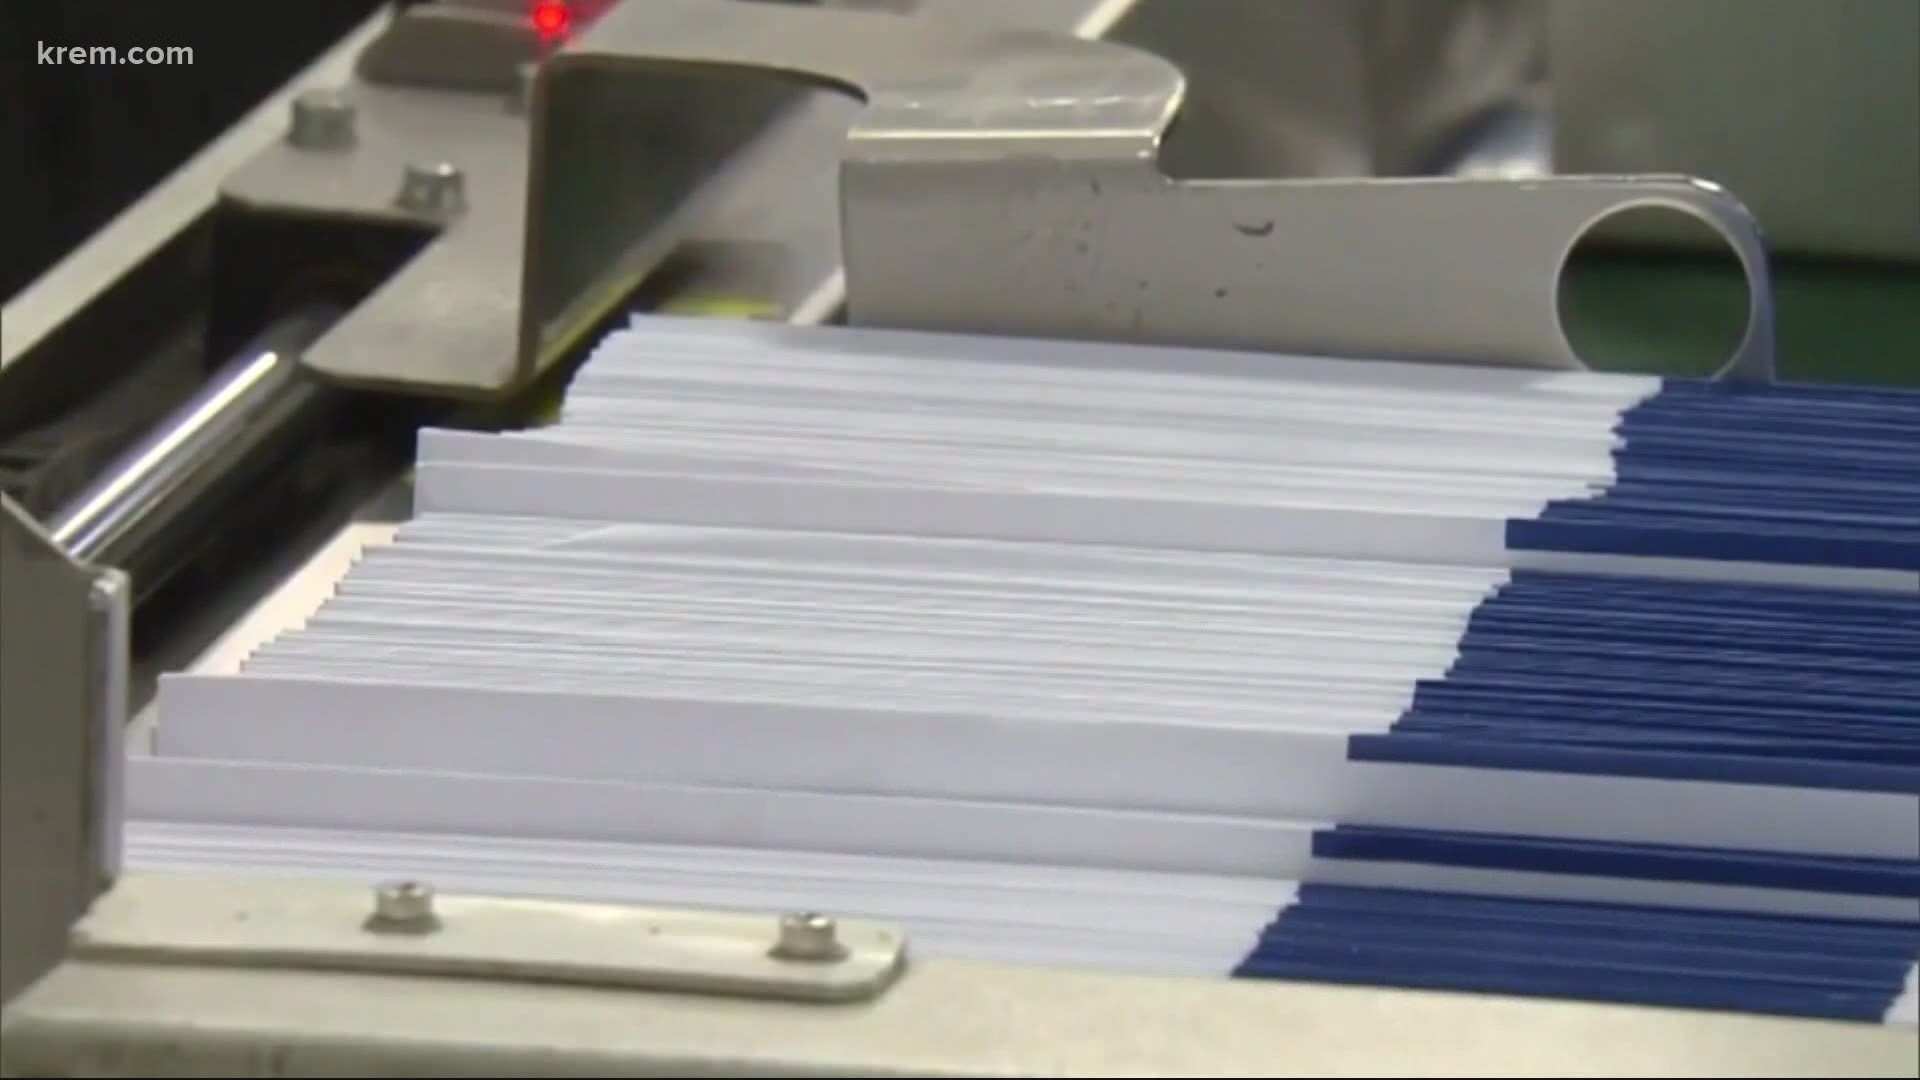 After the Washington state lawsuit was announced, the Postmaster General said he would delay certain changes until after the election.